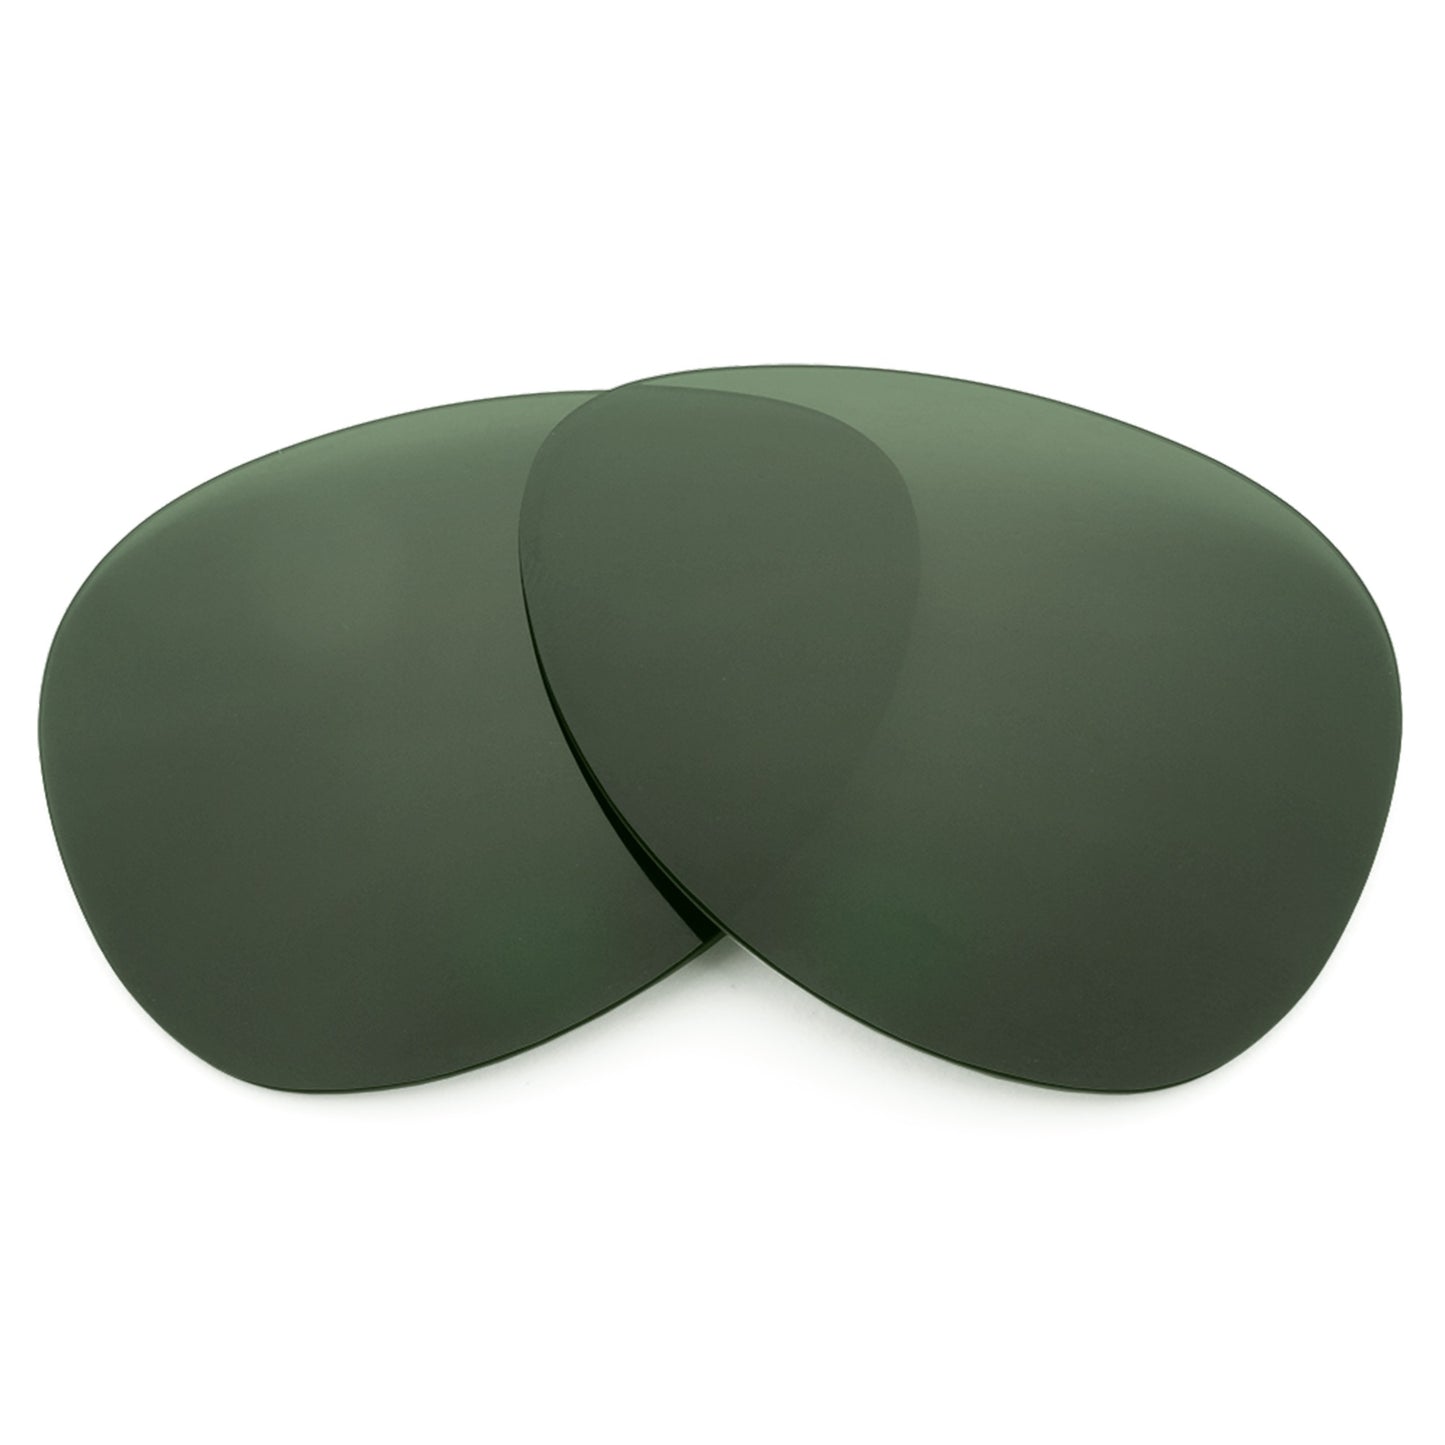 Revant replacement lenses for Ray-Ban Gatsby II RB4257 50mm Non-Polarized Gray Green